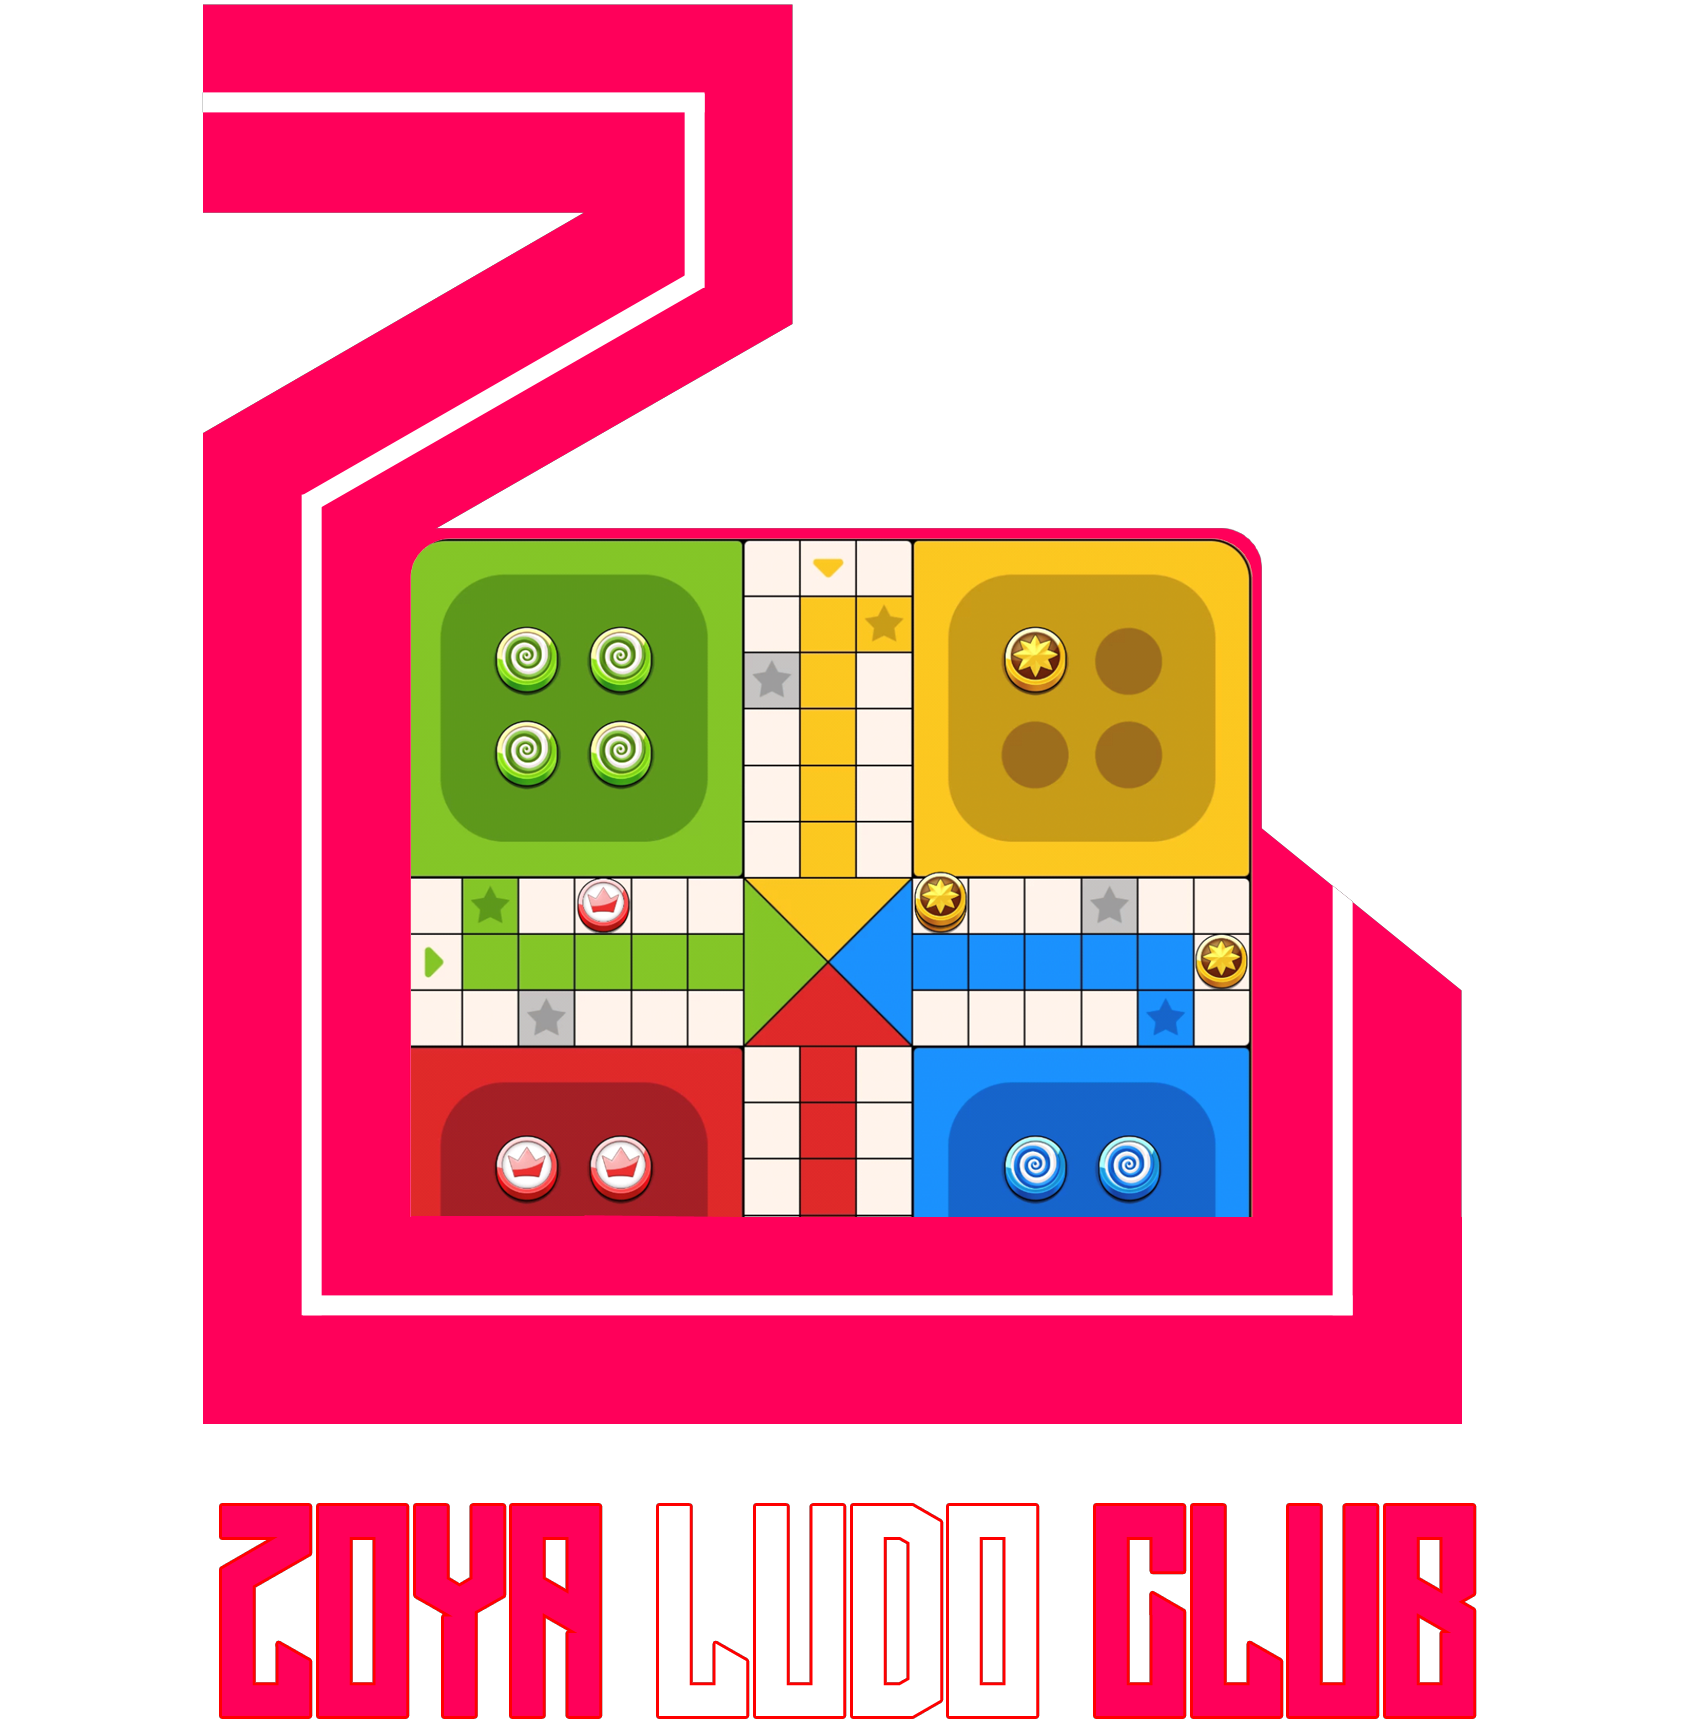 Ludo Club - Board of playing the same old games? Time to